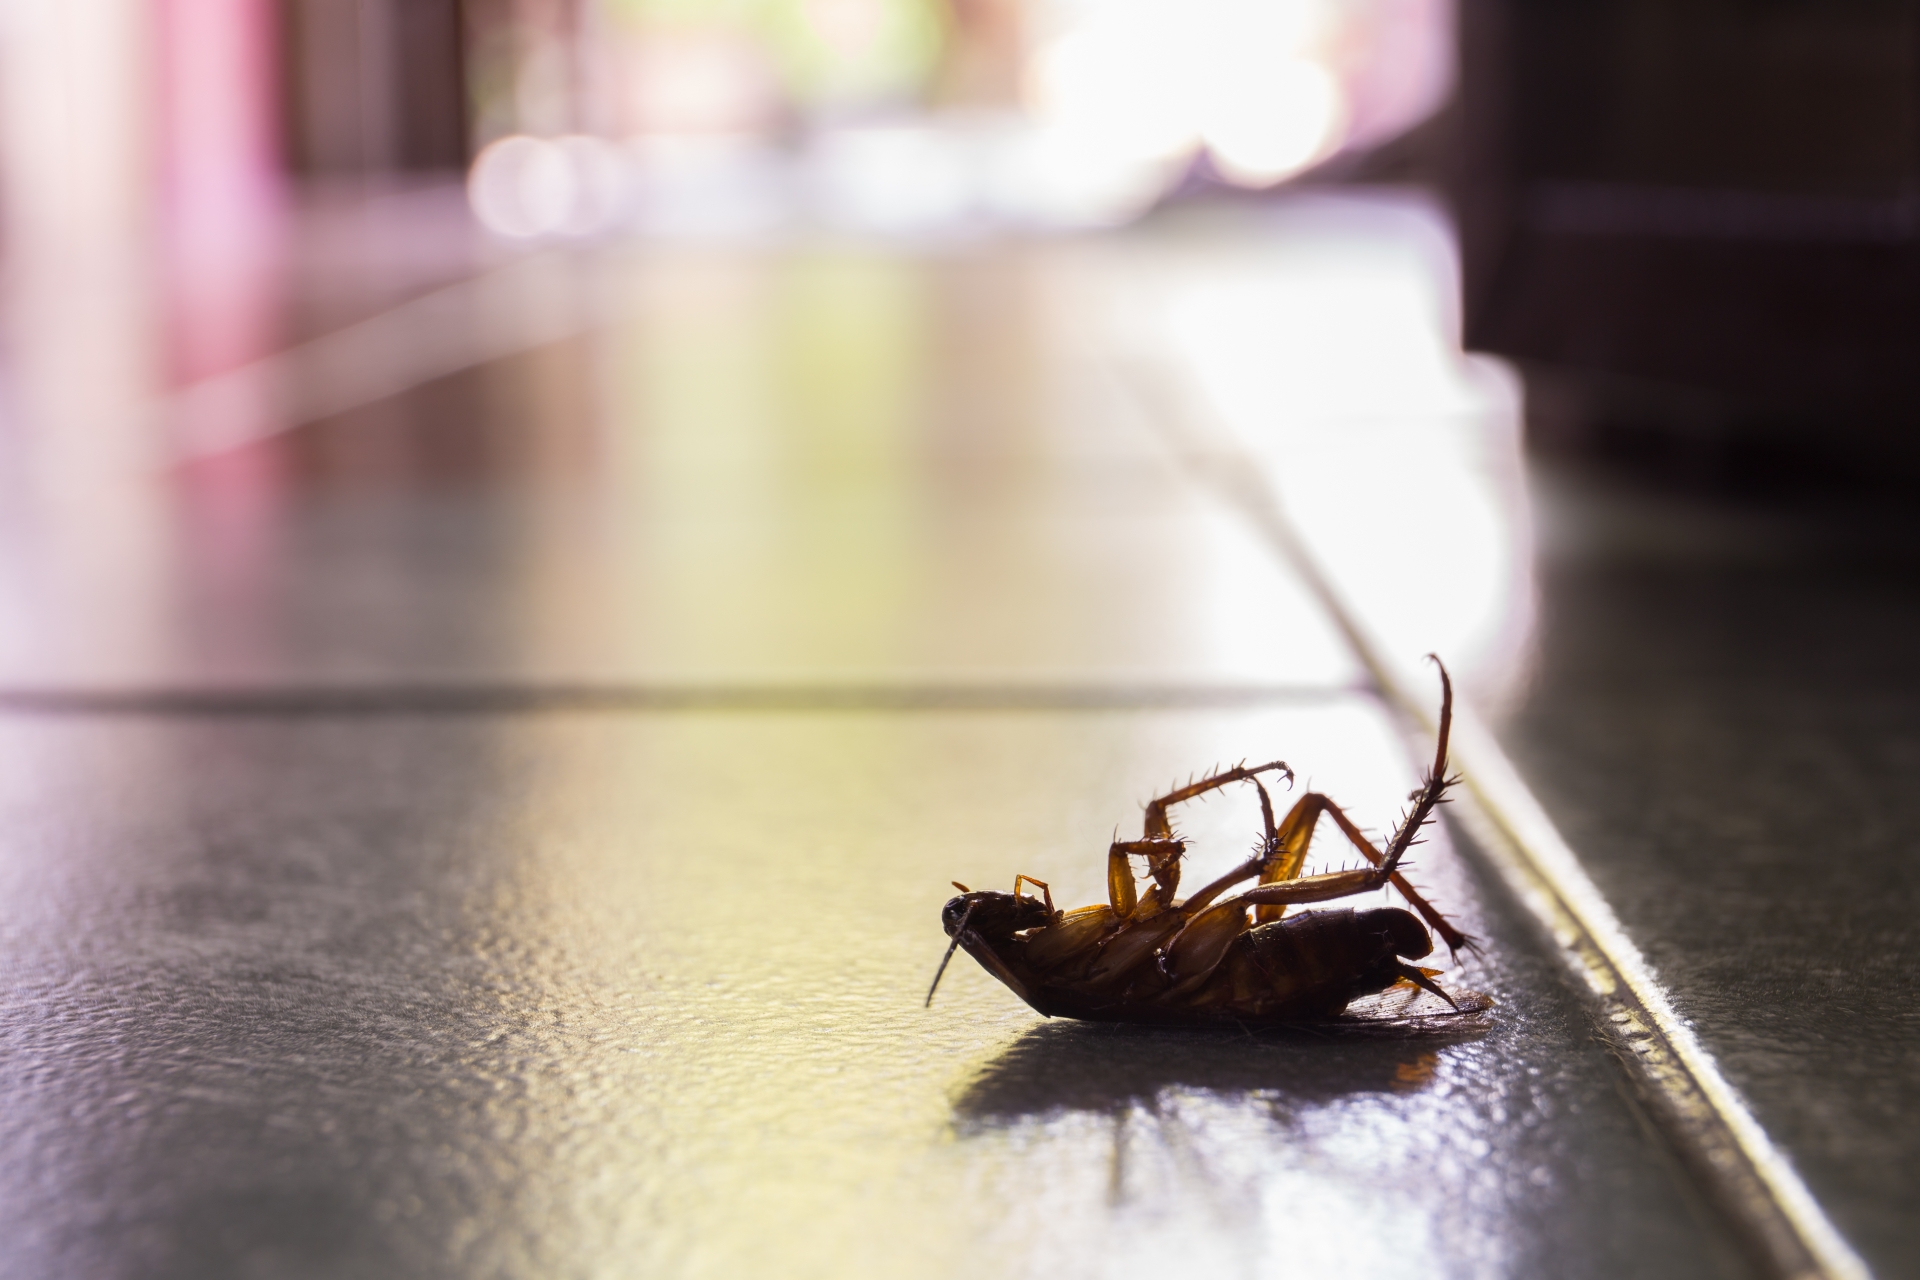 Cockroach Control, Pest Control in Canning Town, North Woolwich, E16. Call Now 020 8166 9746